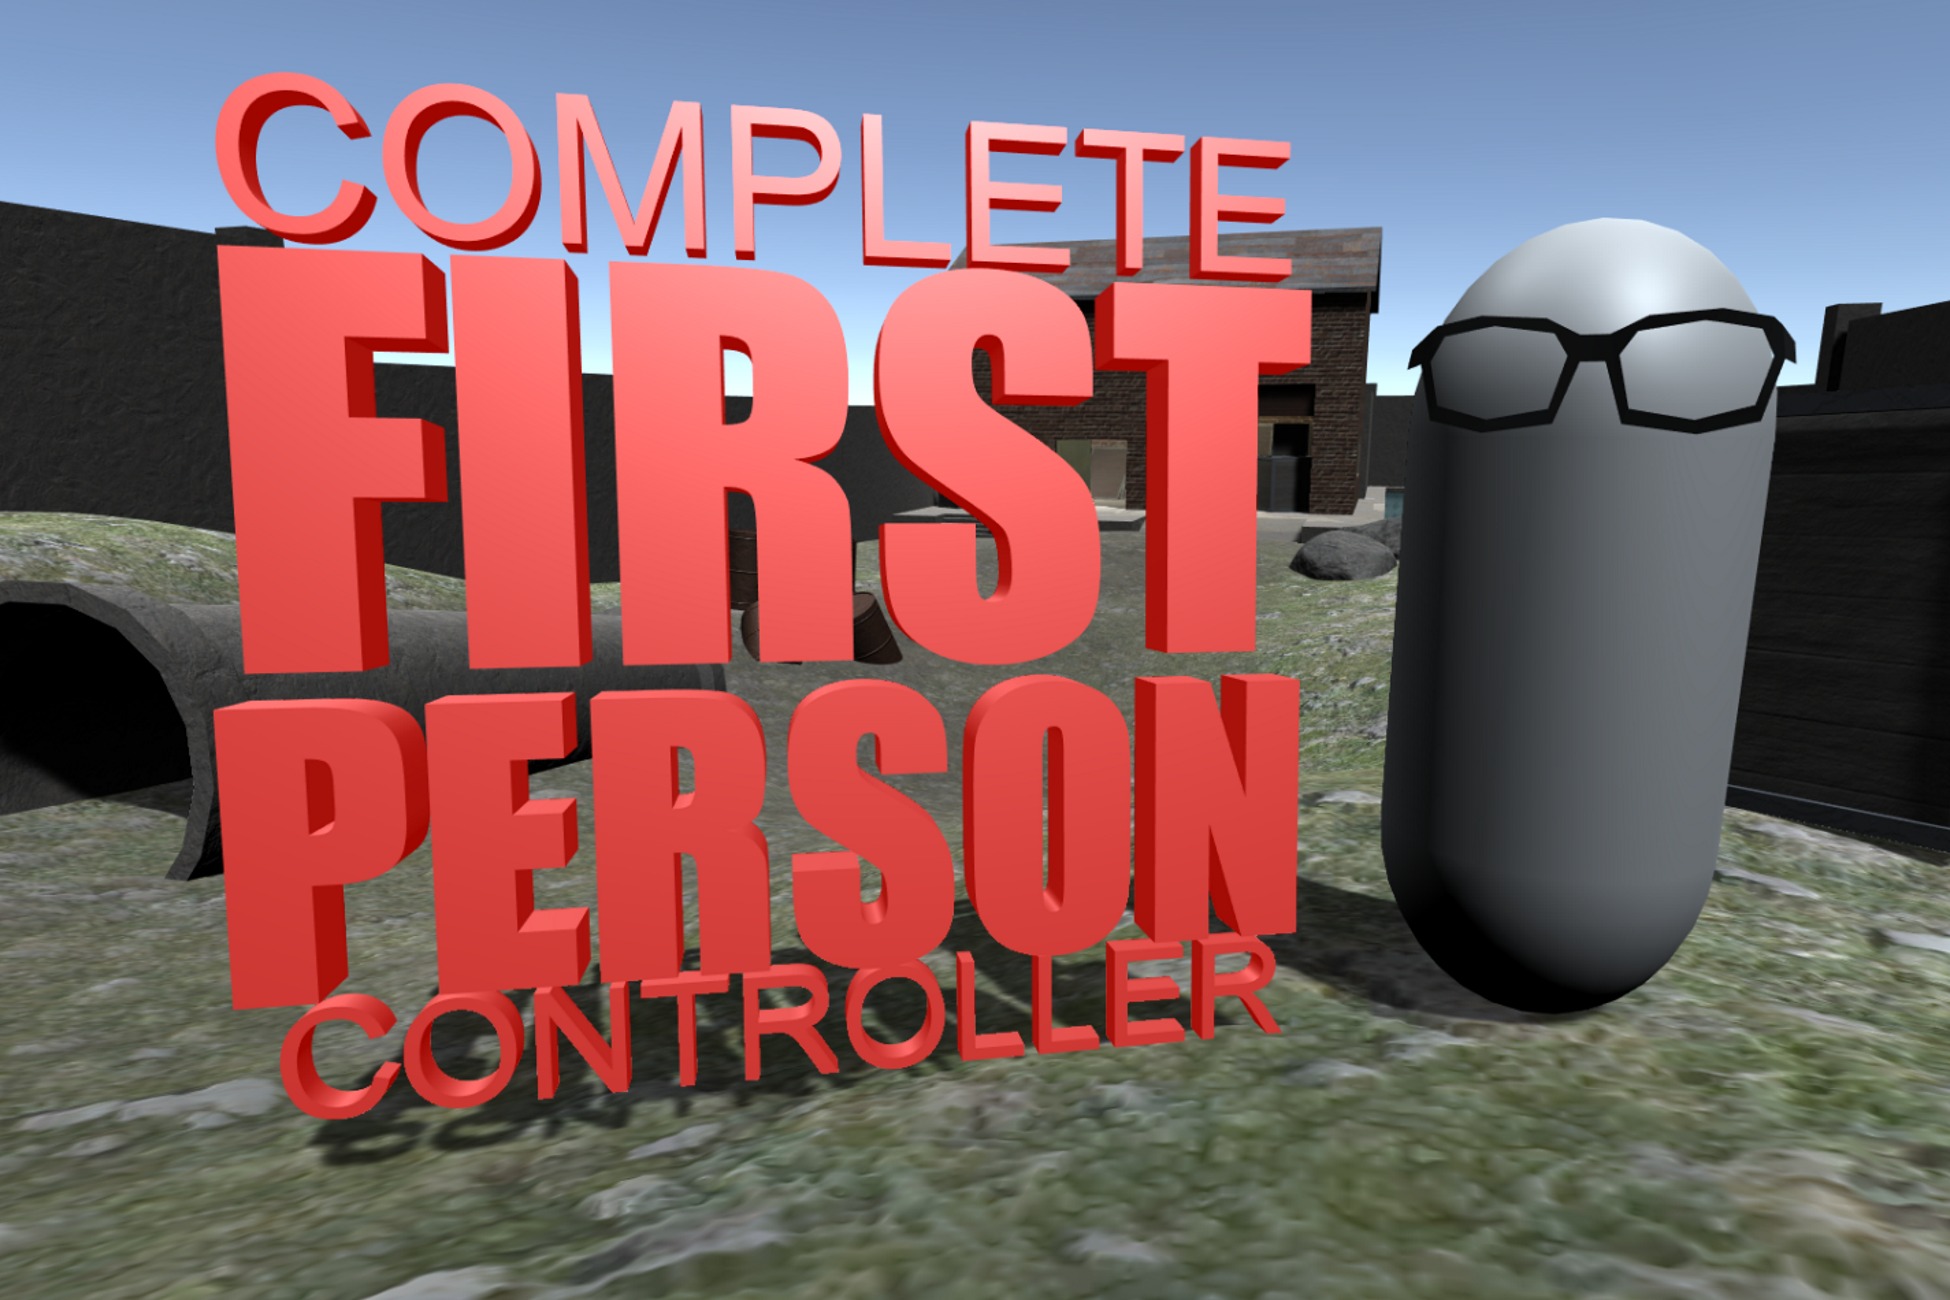 Complete First-Person Controller